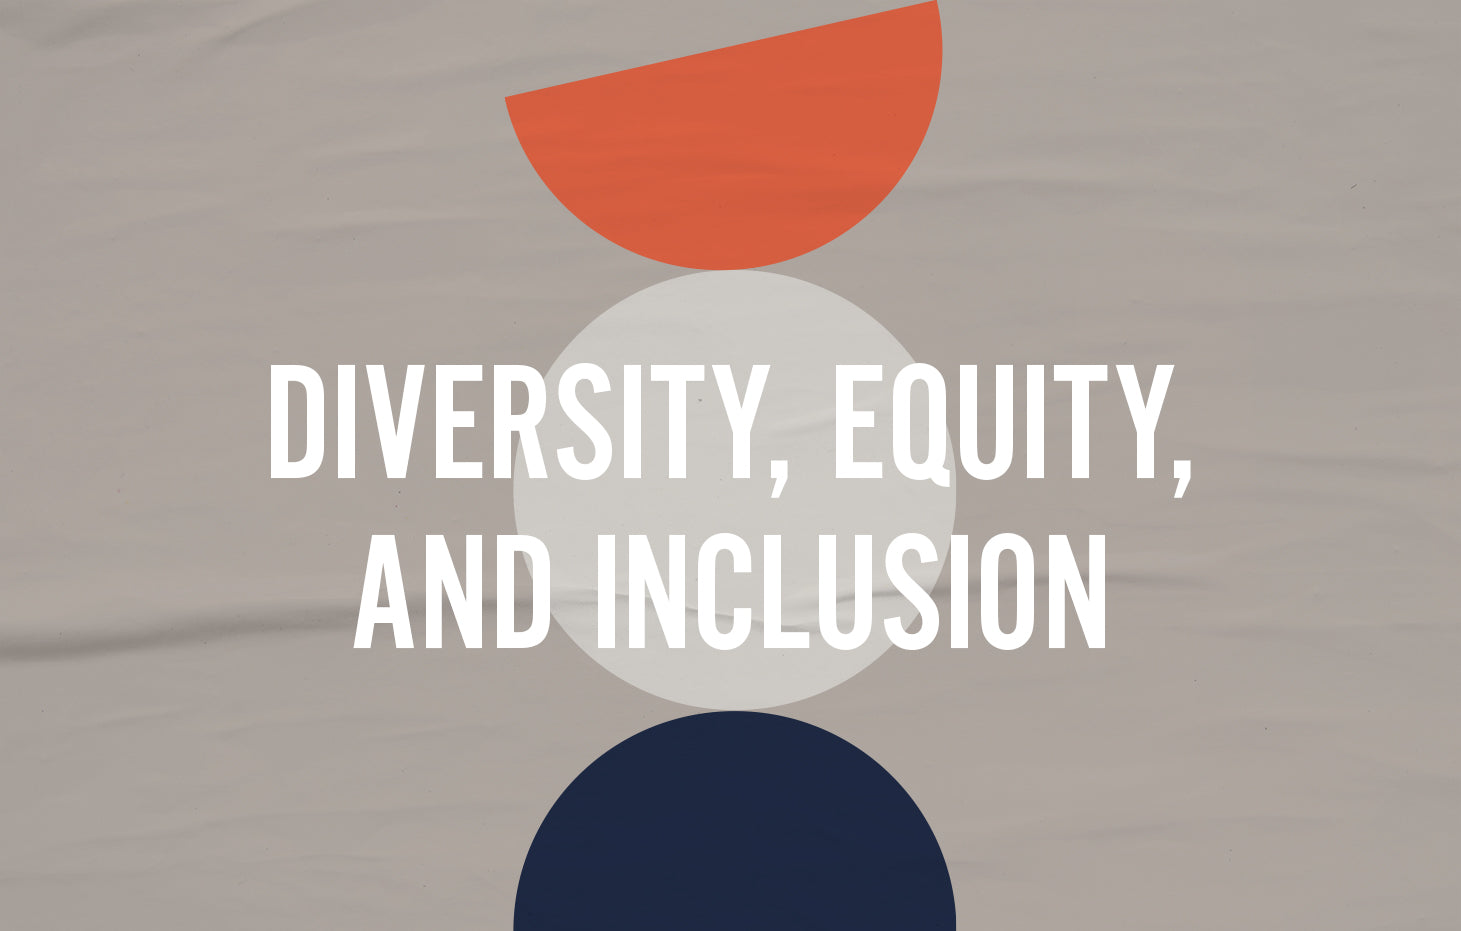 OUR COMMITMENT TO DIVERSITY, EQUITY, AND INCLUSION